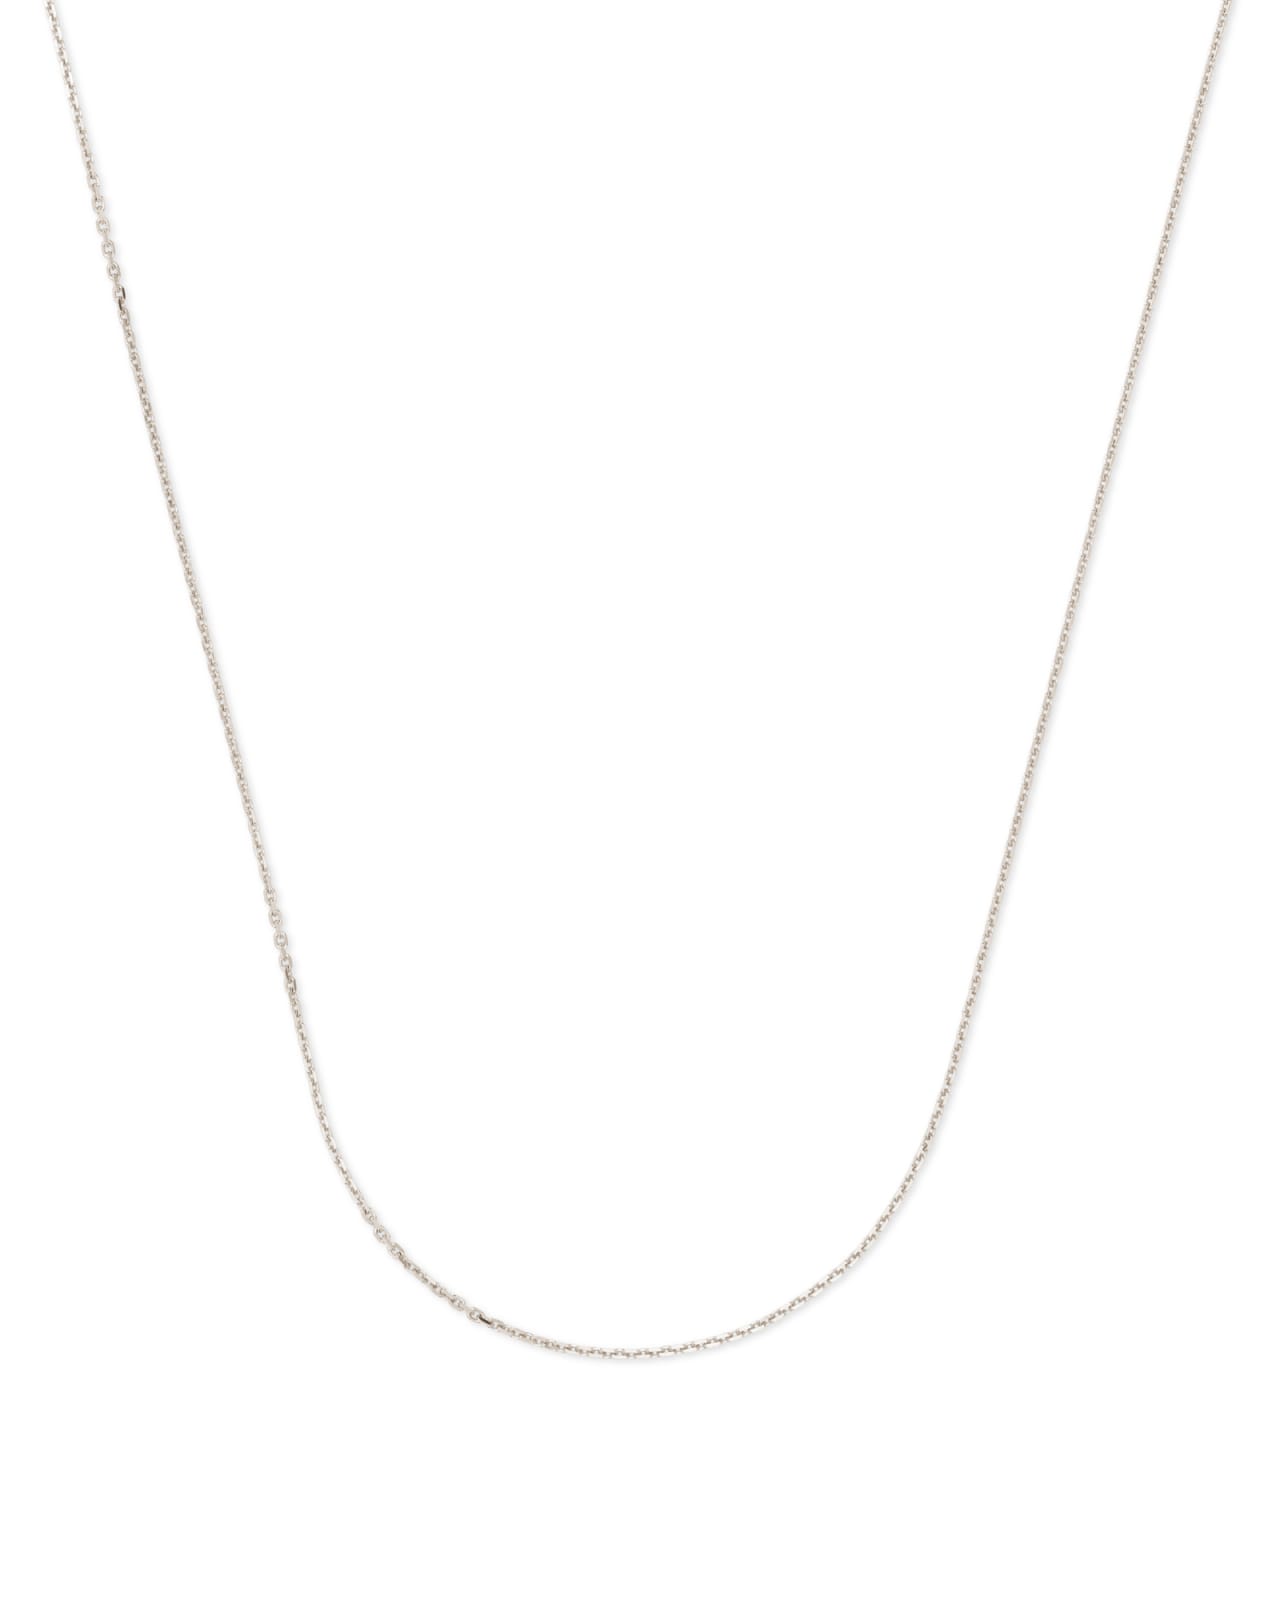 18 Inch Thin Chain Necklace in Sterling Silver